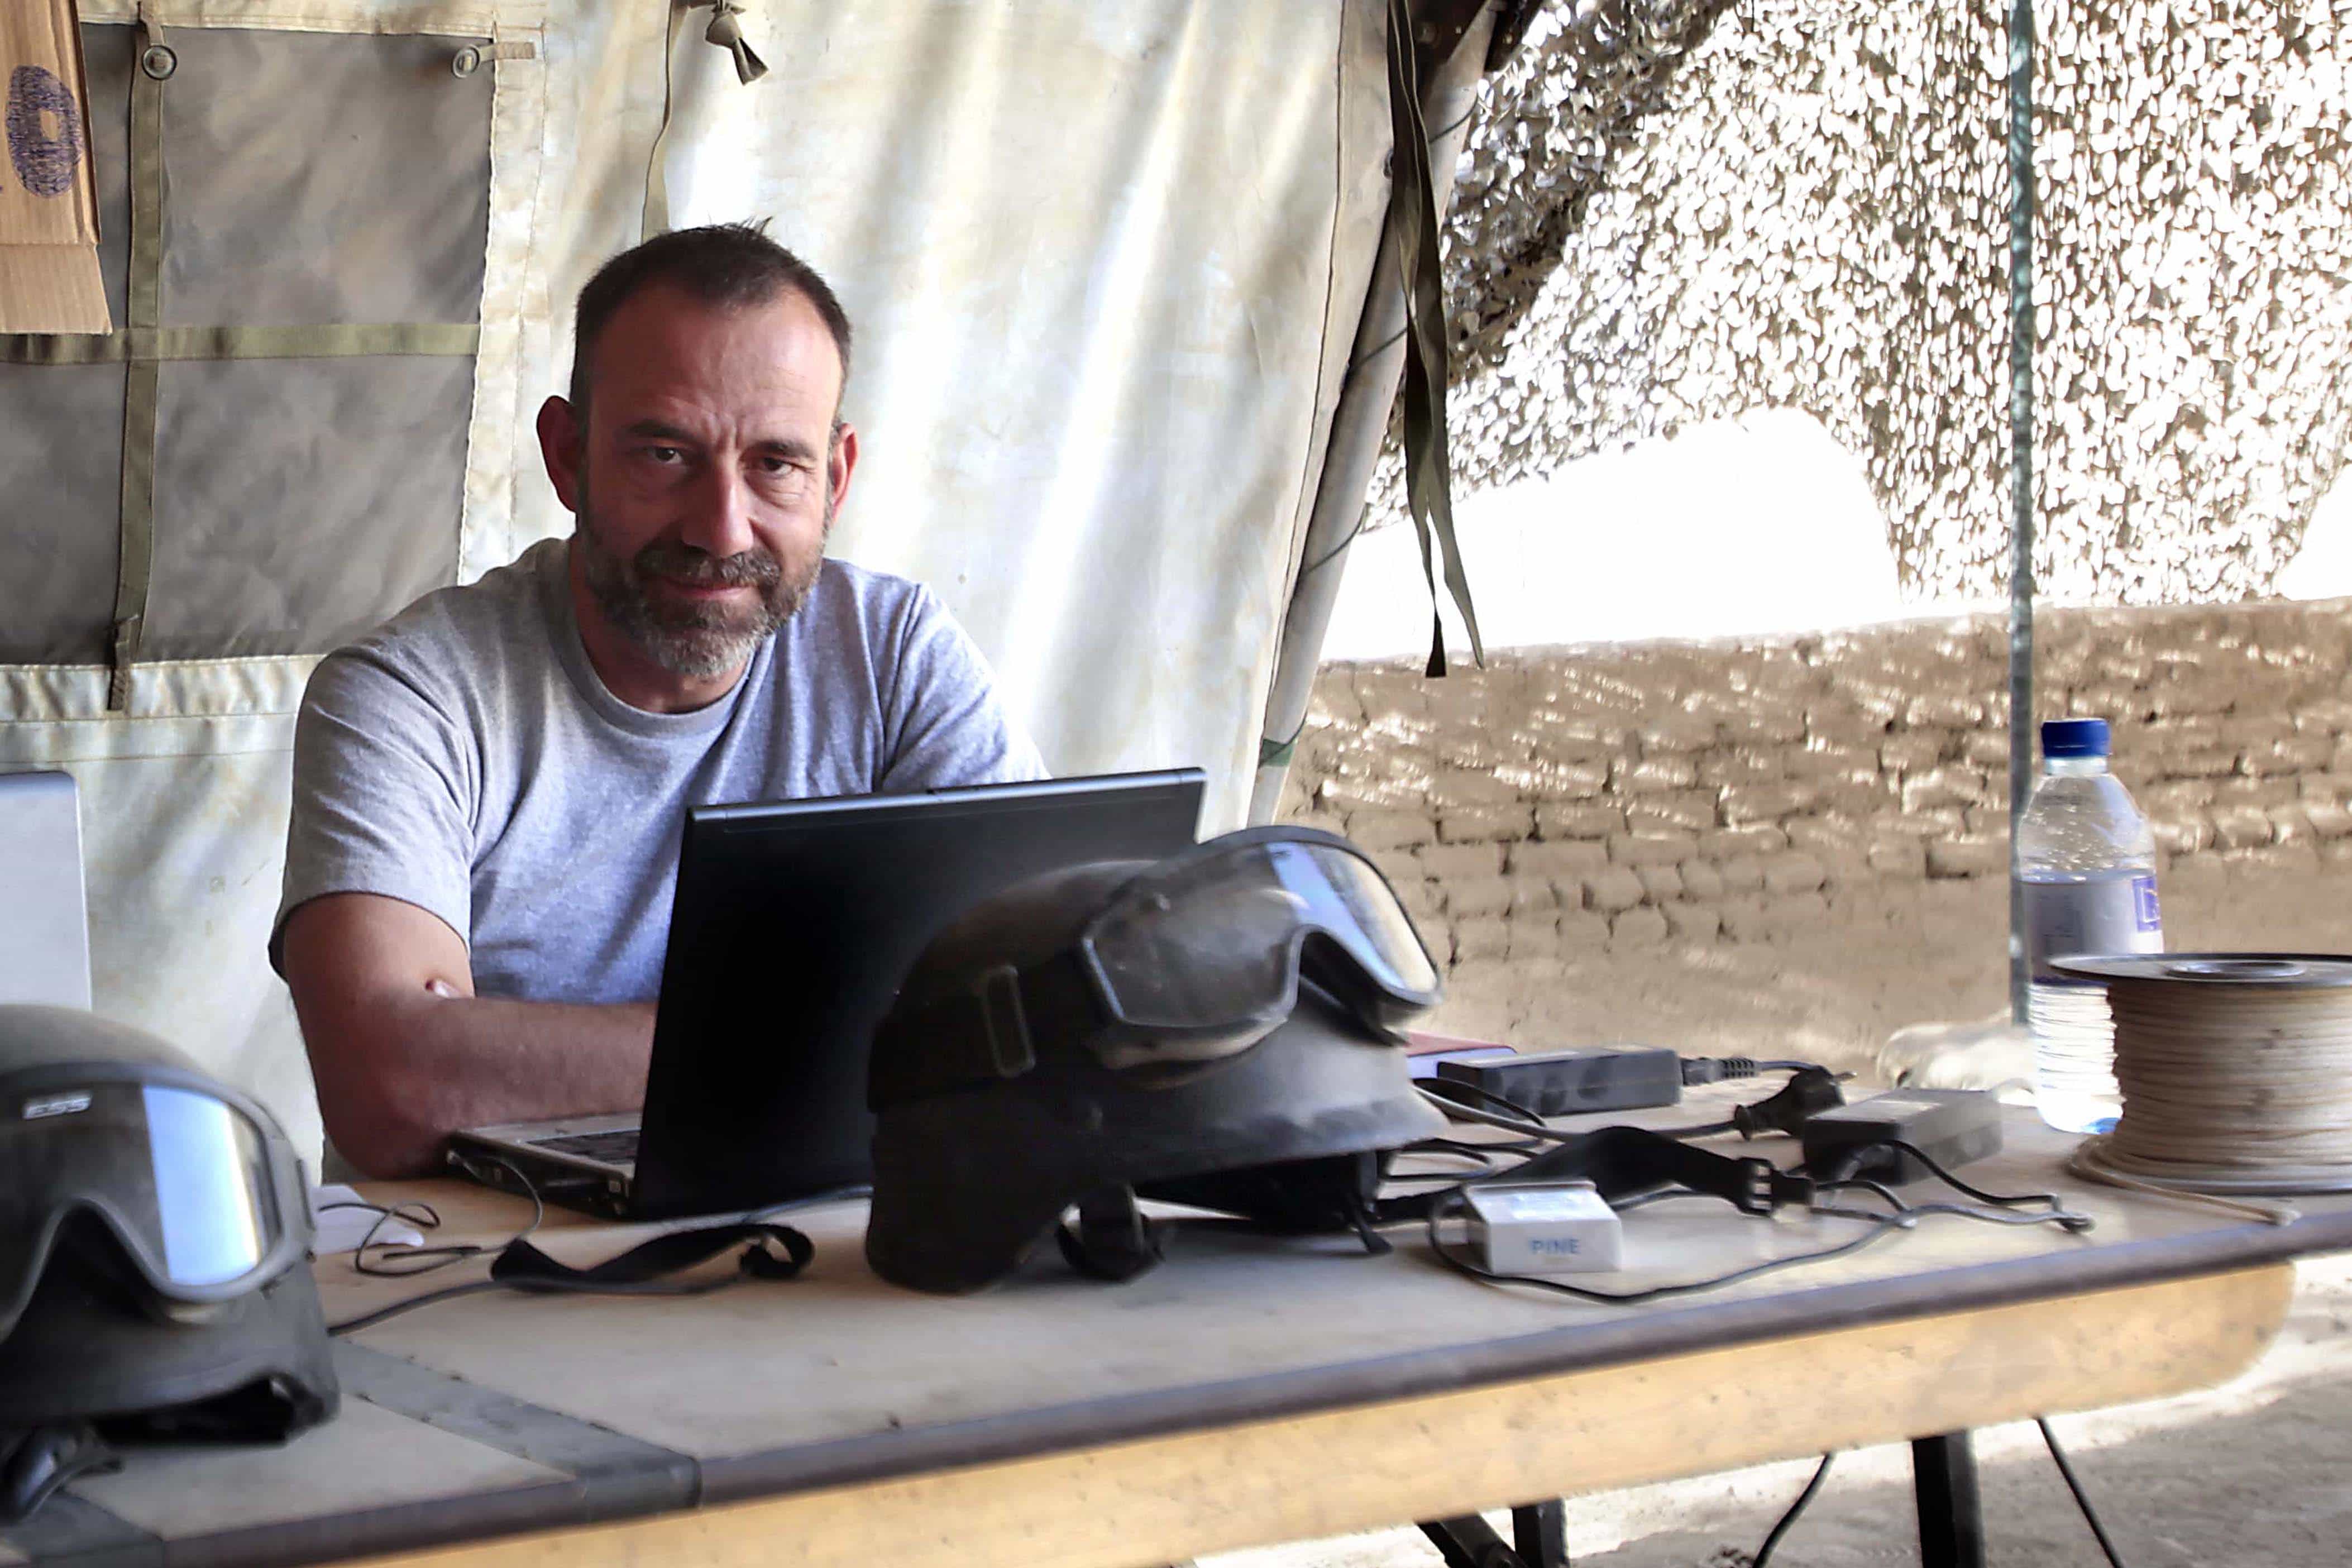 Journalist Marc Marginedas  sits by his laptop at the Canadian base in Nakhonay, Afghanistan in this photo taken on 10 October 2010., AP Photo/Agustin Catalan, El Periodico de Catalunya